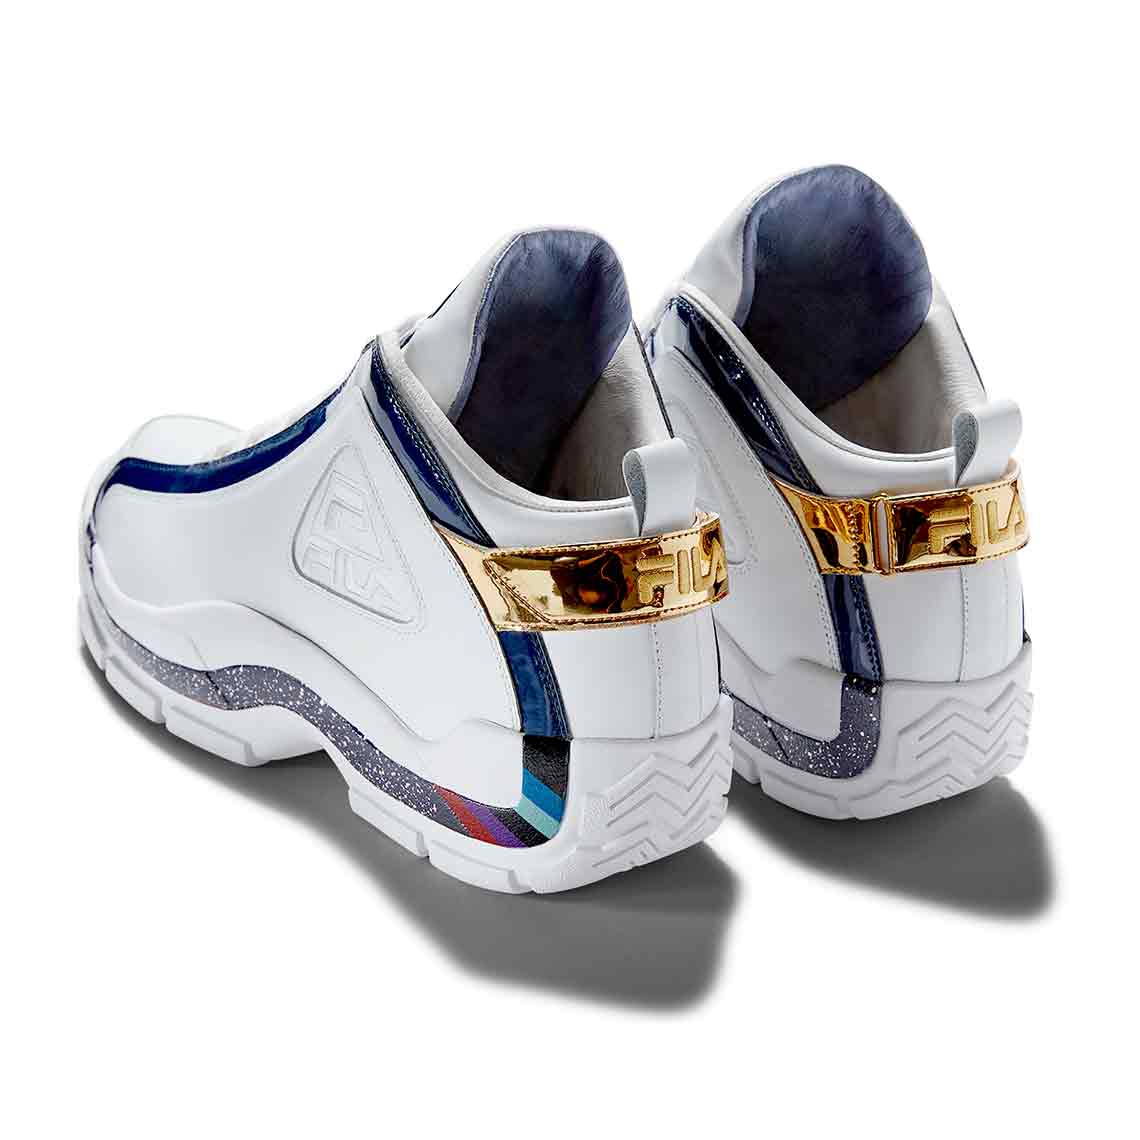 grant hill shoes 2018